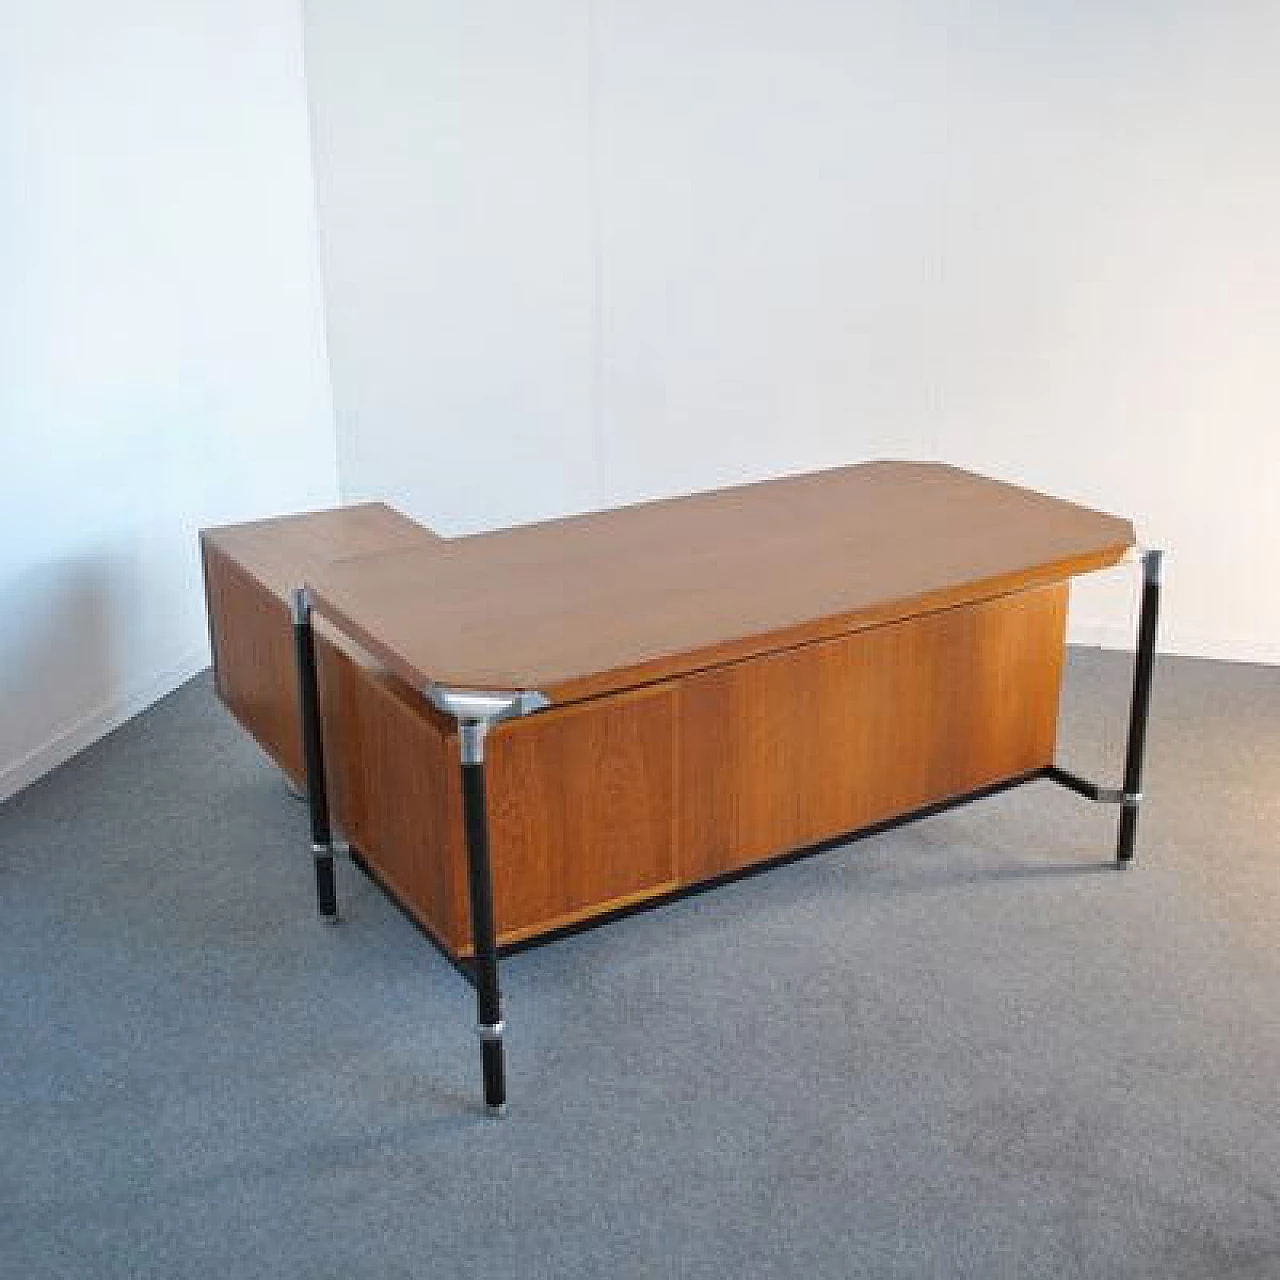 Executive desk by Ico Parisi for MIM Rome, 1950s 1412236